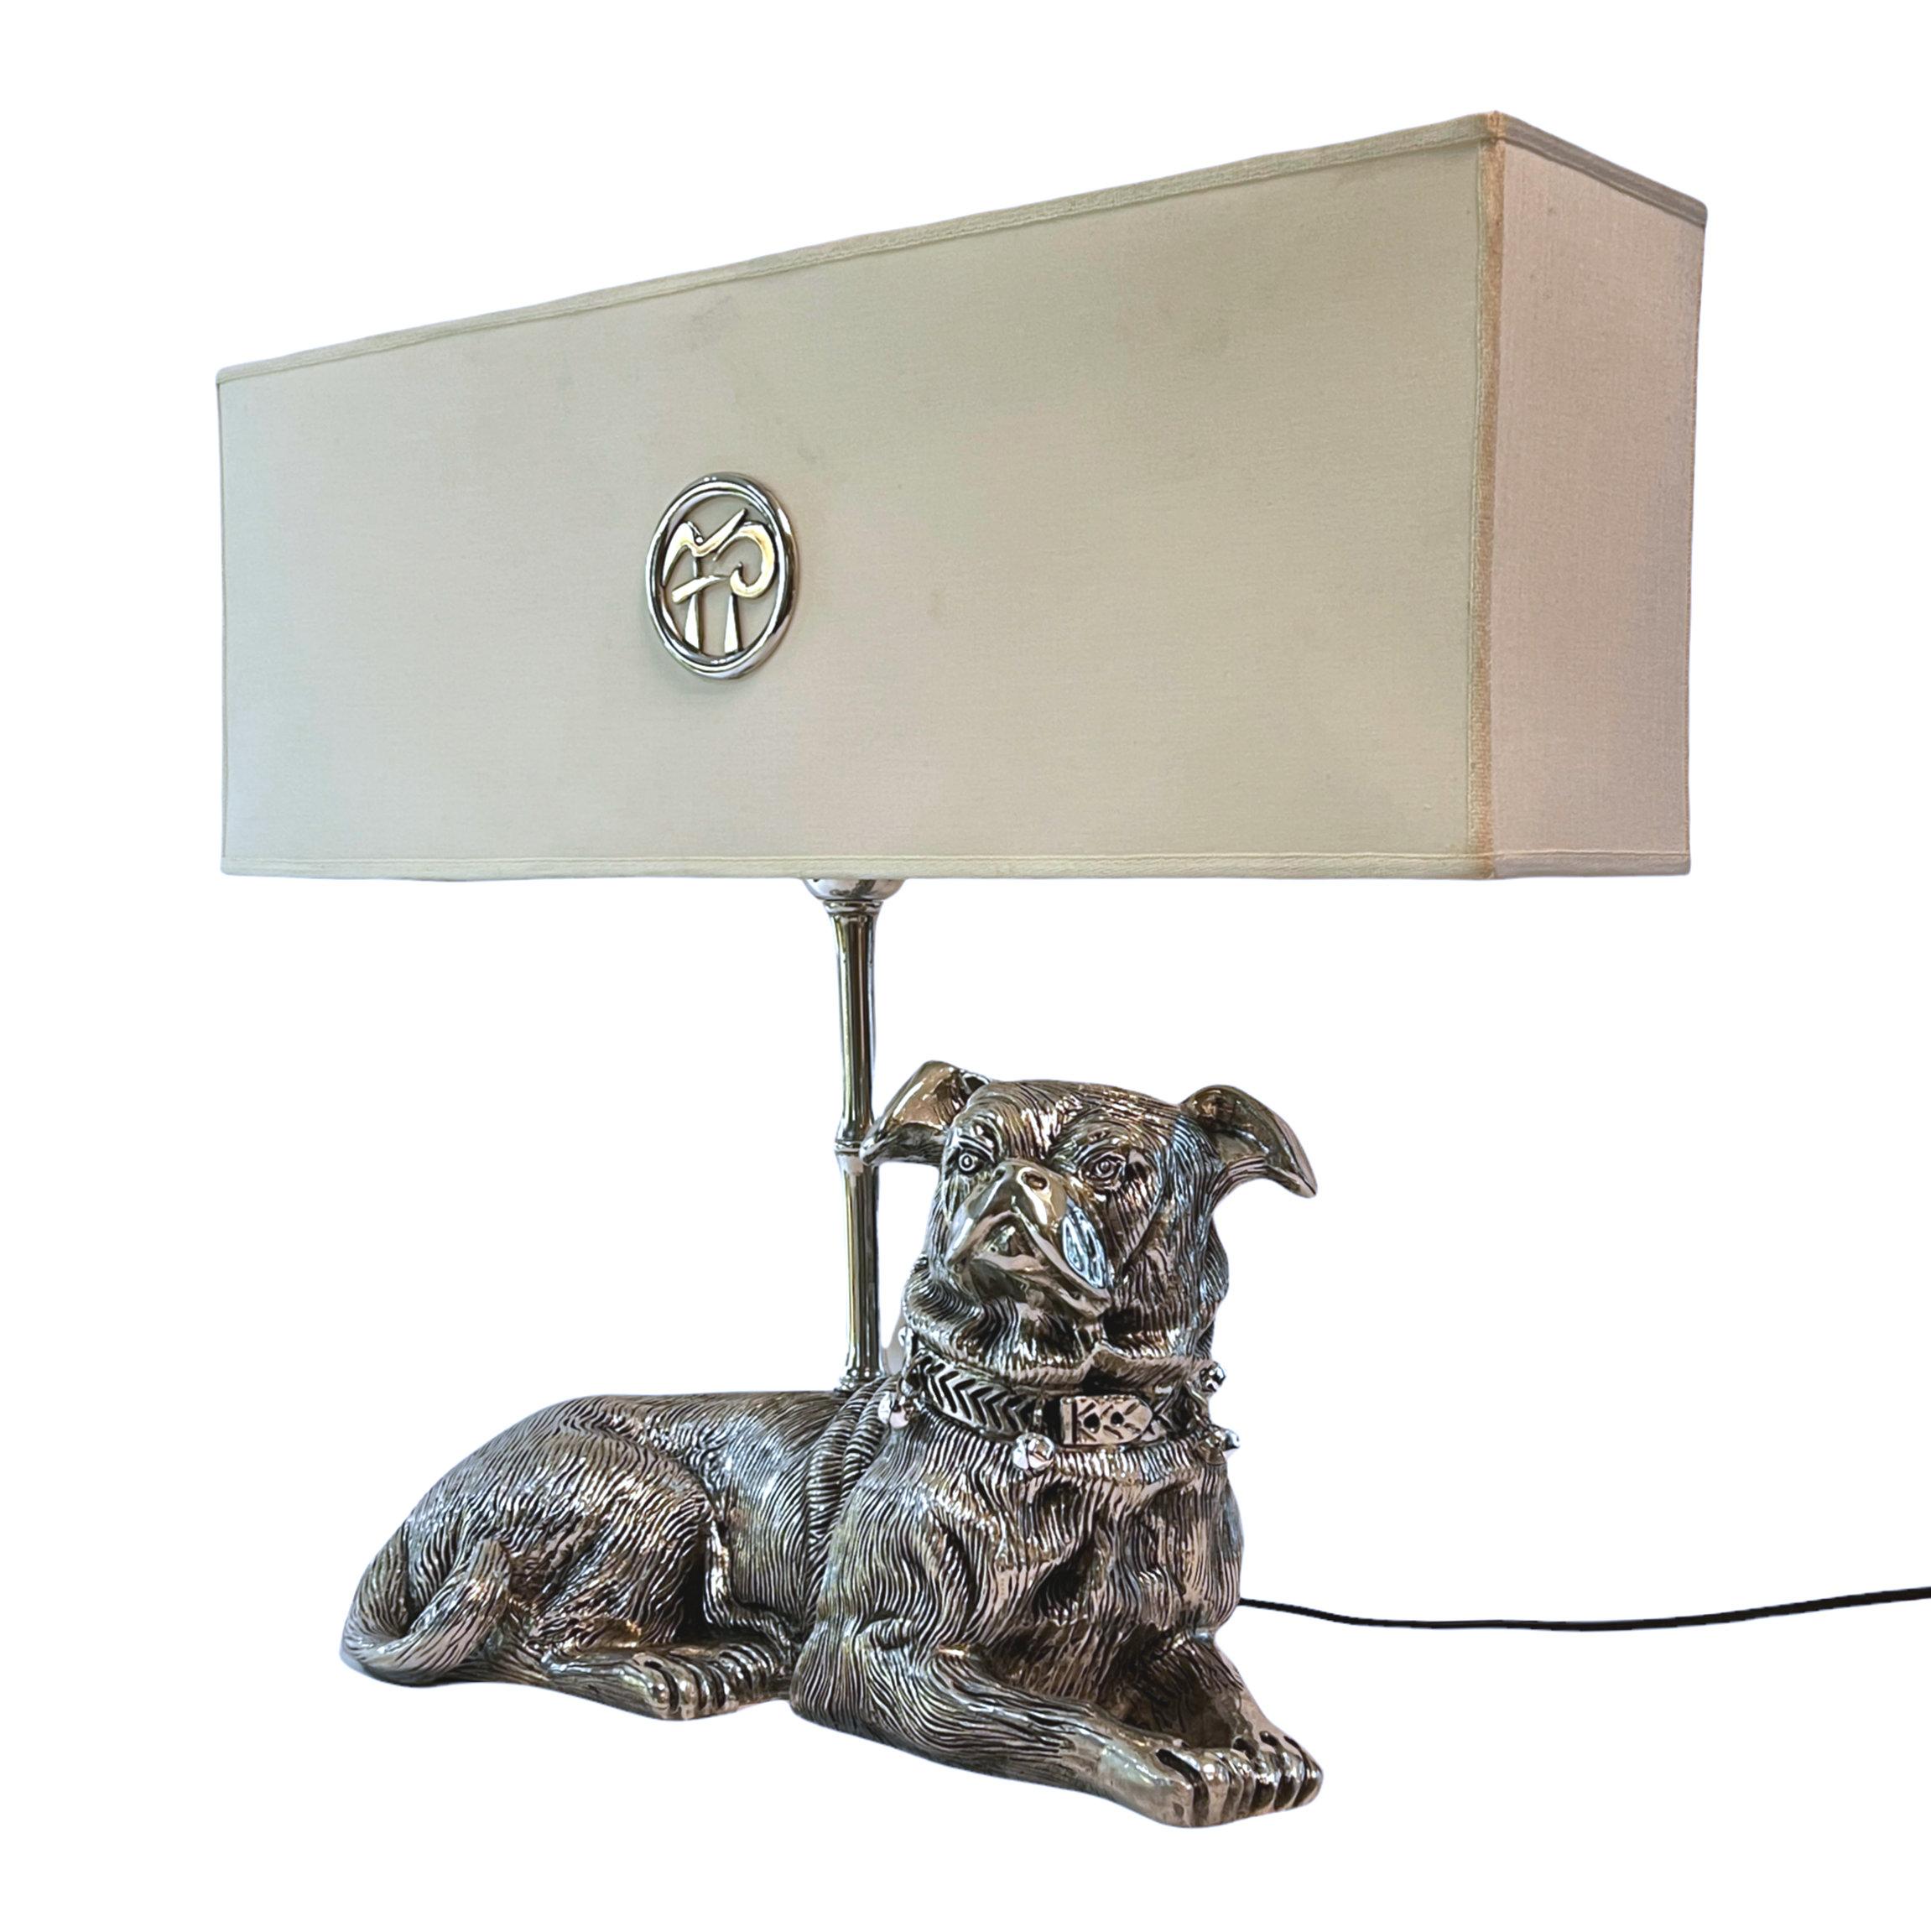 Our unique Italian silverplated pewter lamp depicts a seated pug is in excellent condition. Lamp with original shade measures 24.5 in wide and 20 in tall and is in very good condition, with some areas of very light soiling, hardly noticeable. The